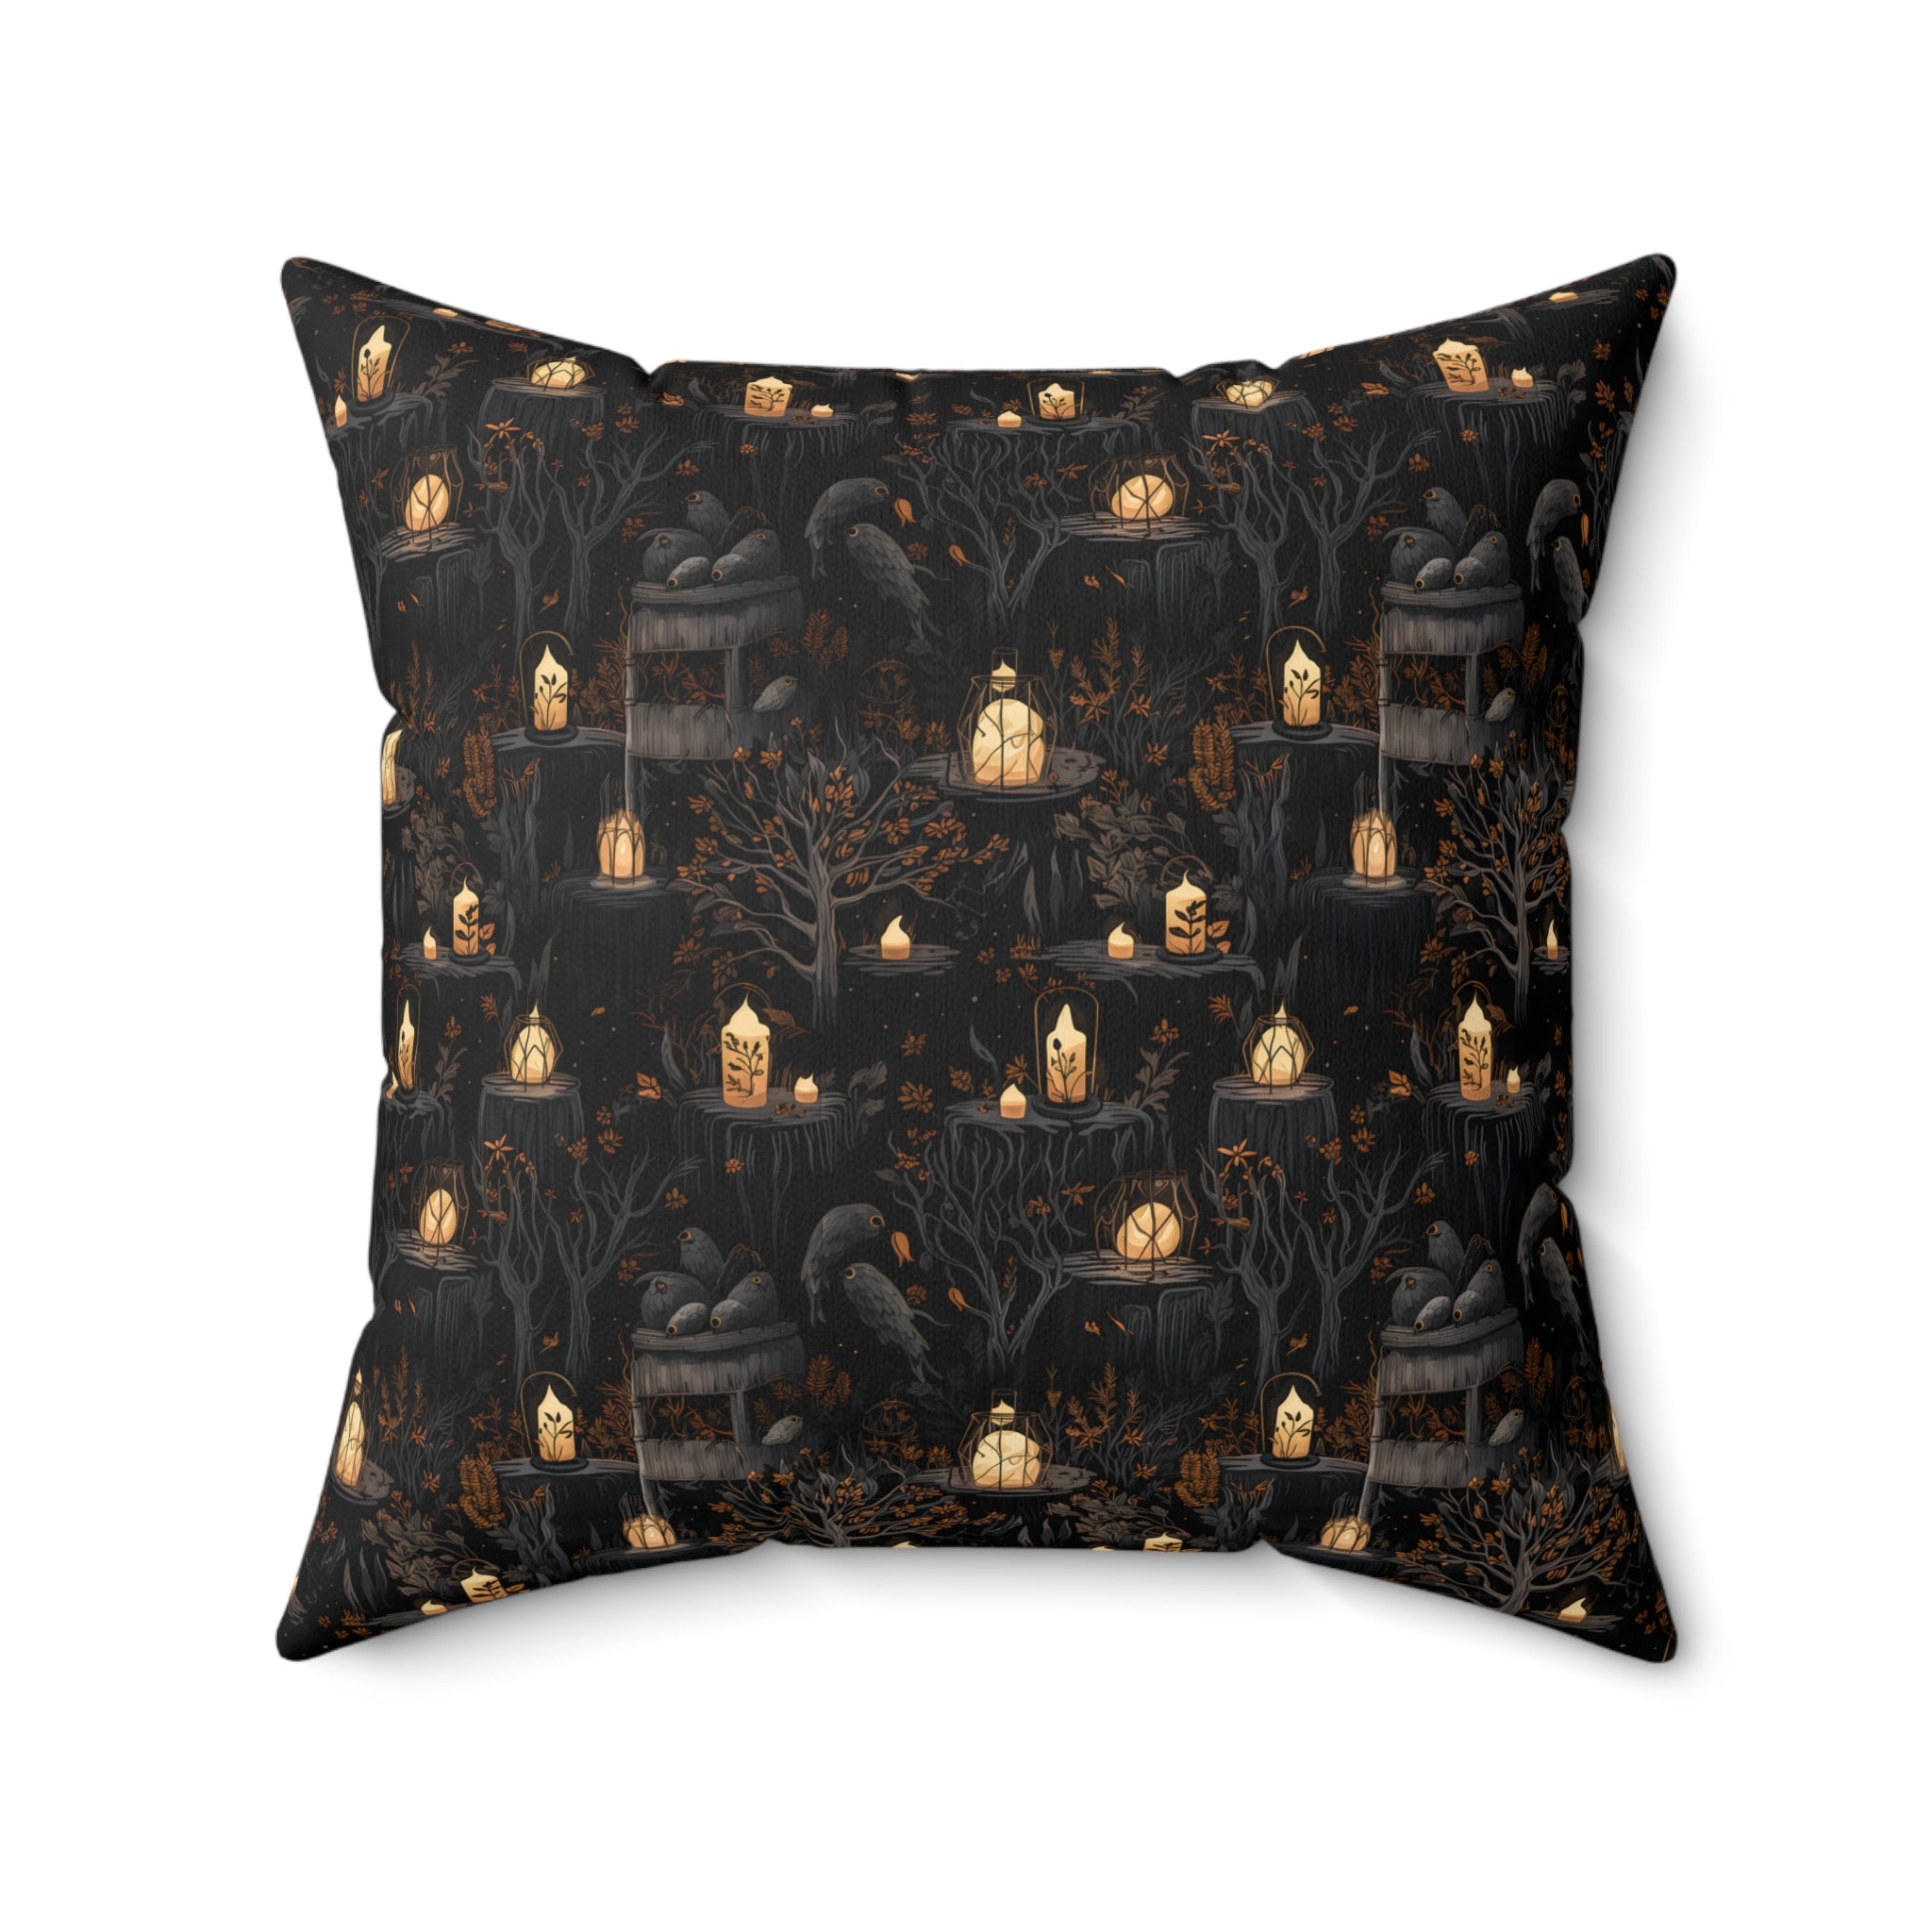 Ravenous Woods Faux Suede Pillow or Pillow Cover